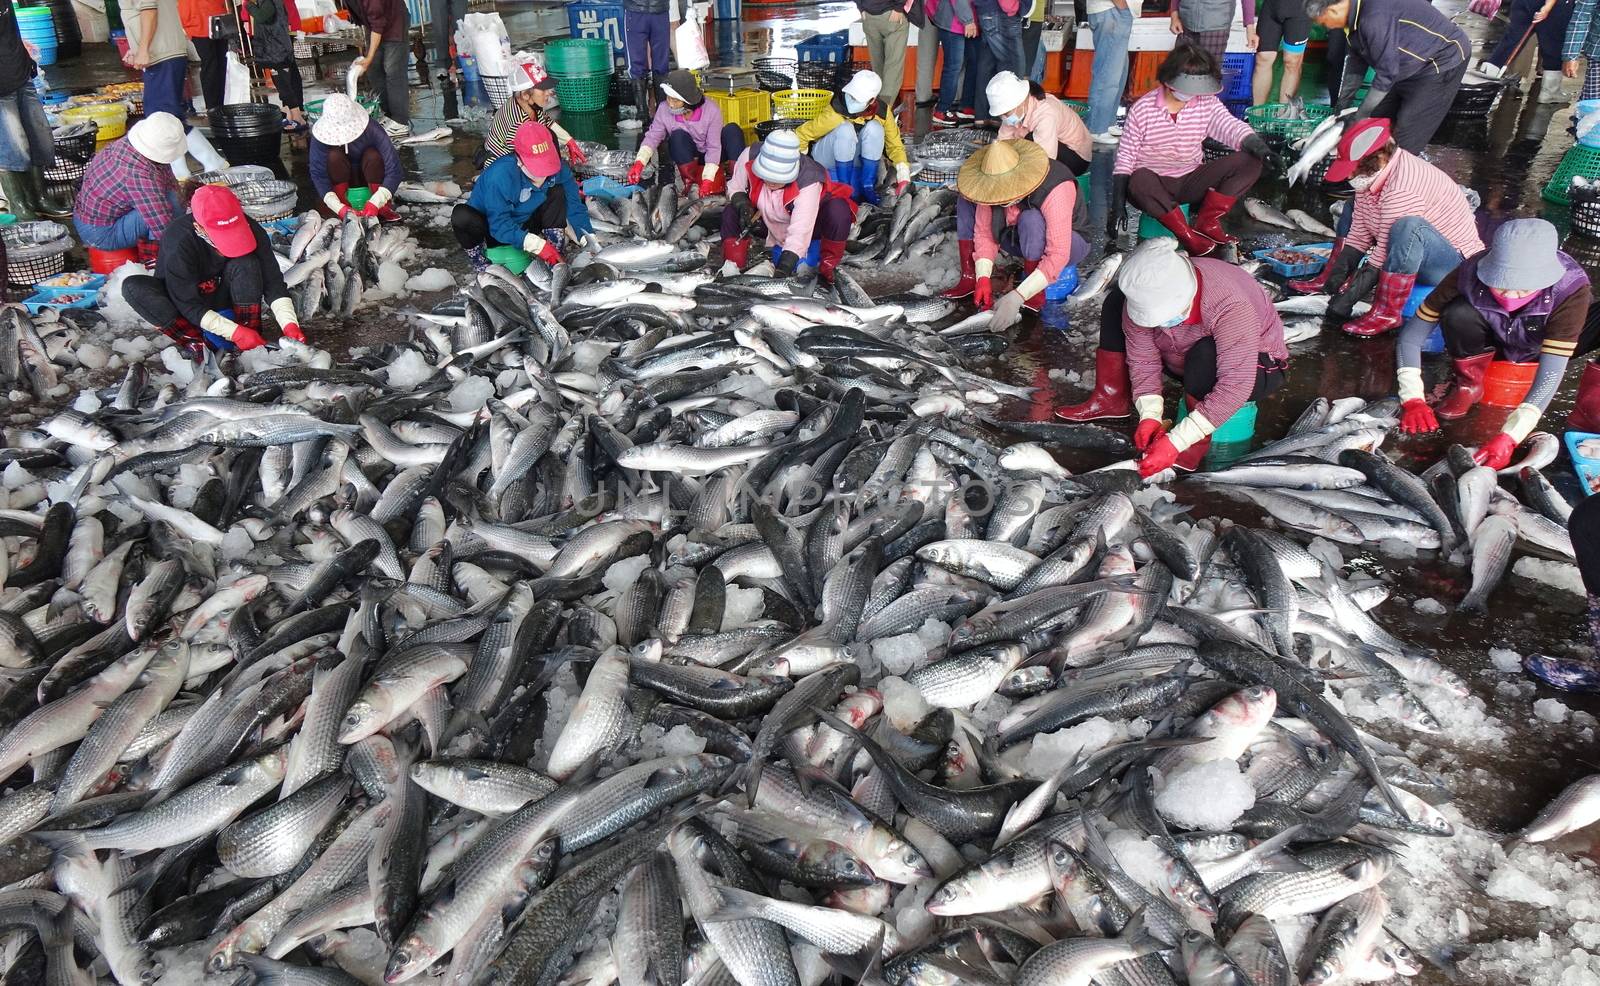 KAOHSIUNG, TAIWAN -- JANUARY 13, 2019: Workers at the Sinda fish market extract the roe from grey mullet fish. The roe will be dried, pressed and salted.
